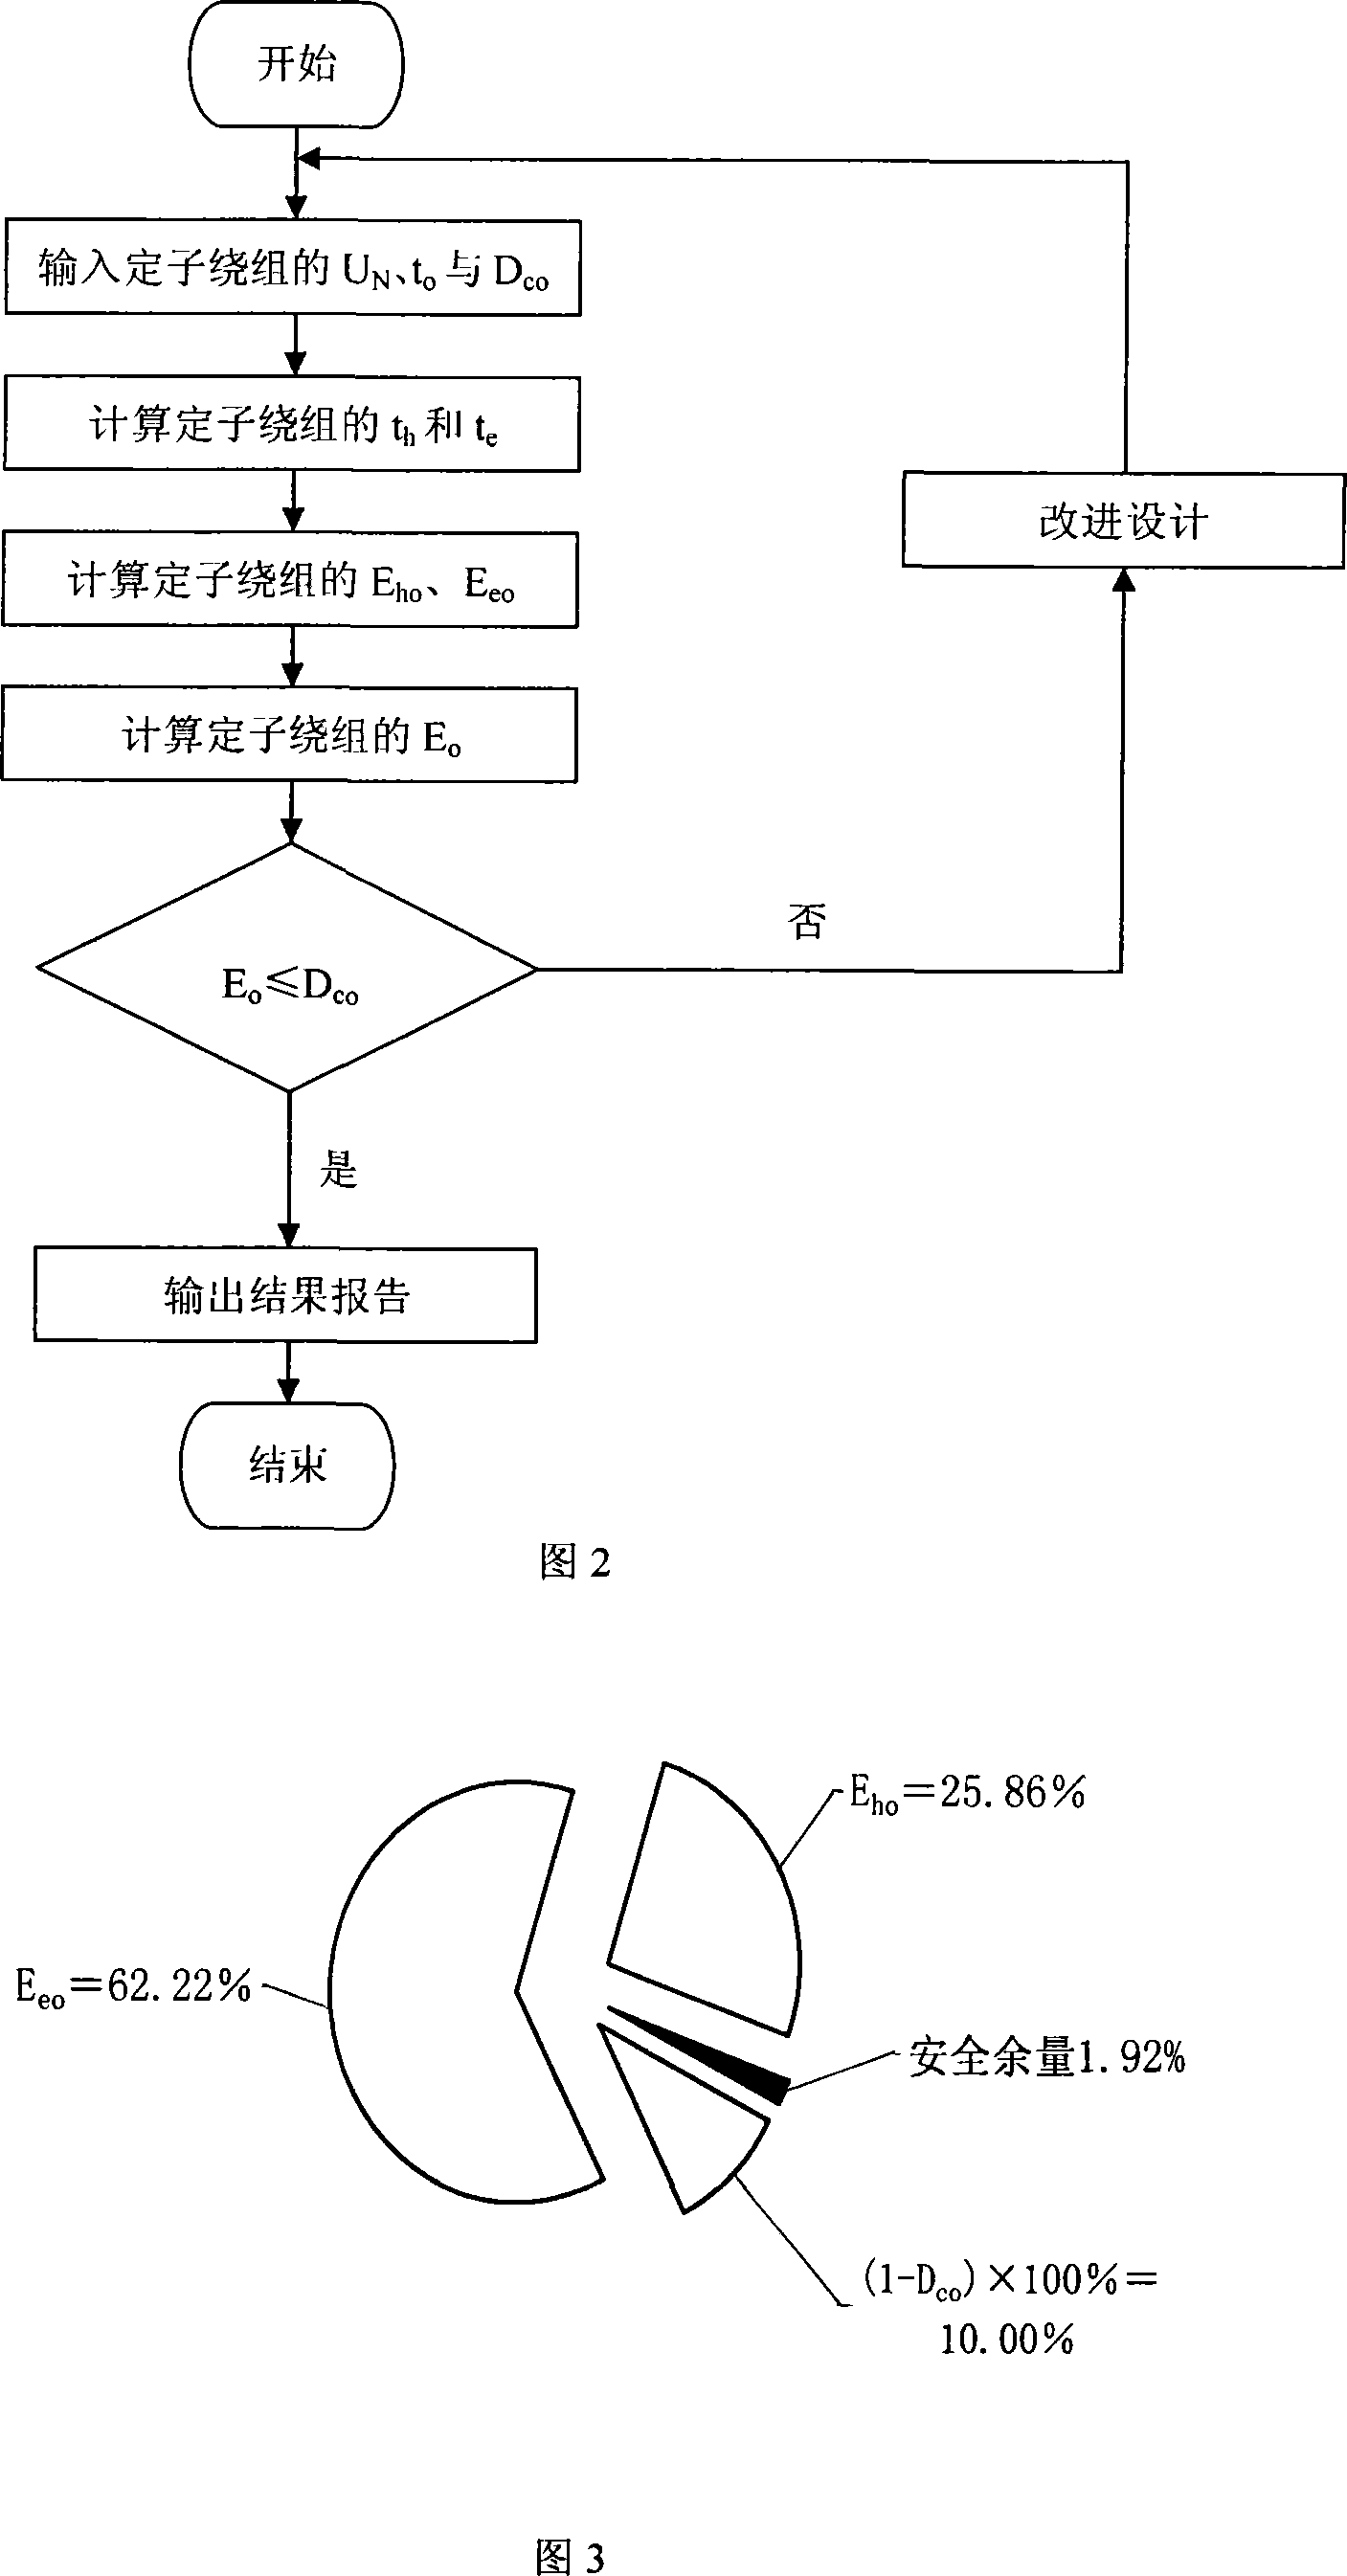 Design method for insulation service life of turbine generator stator winding and its appraising method